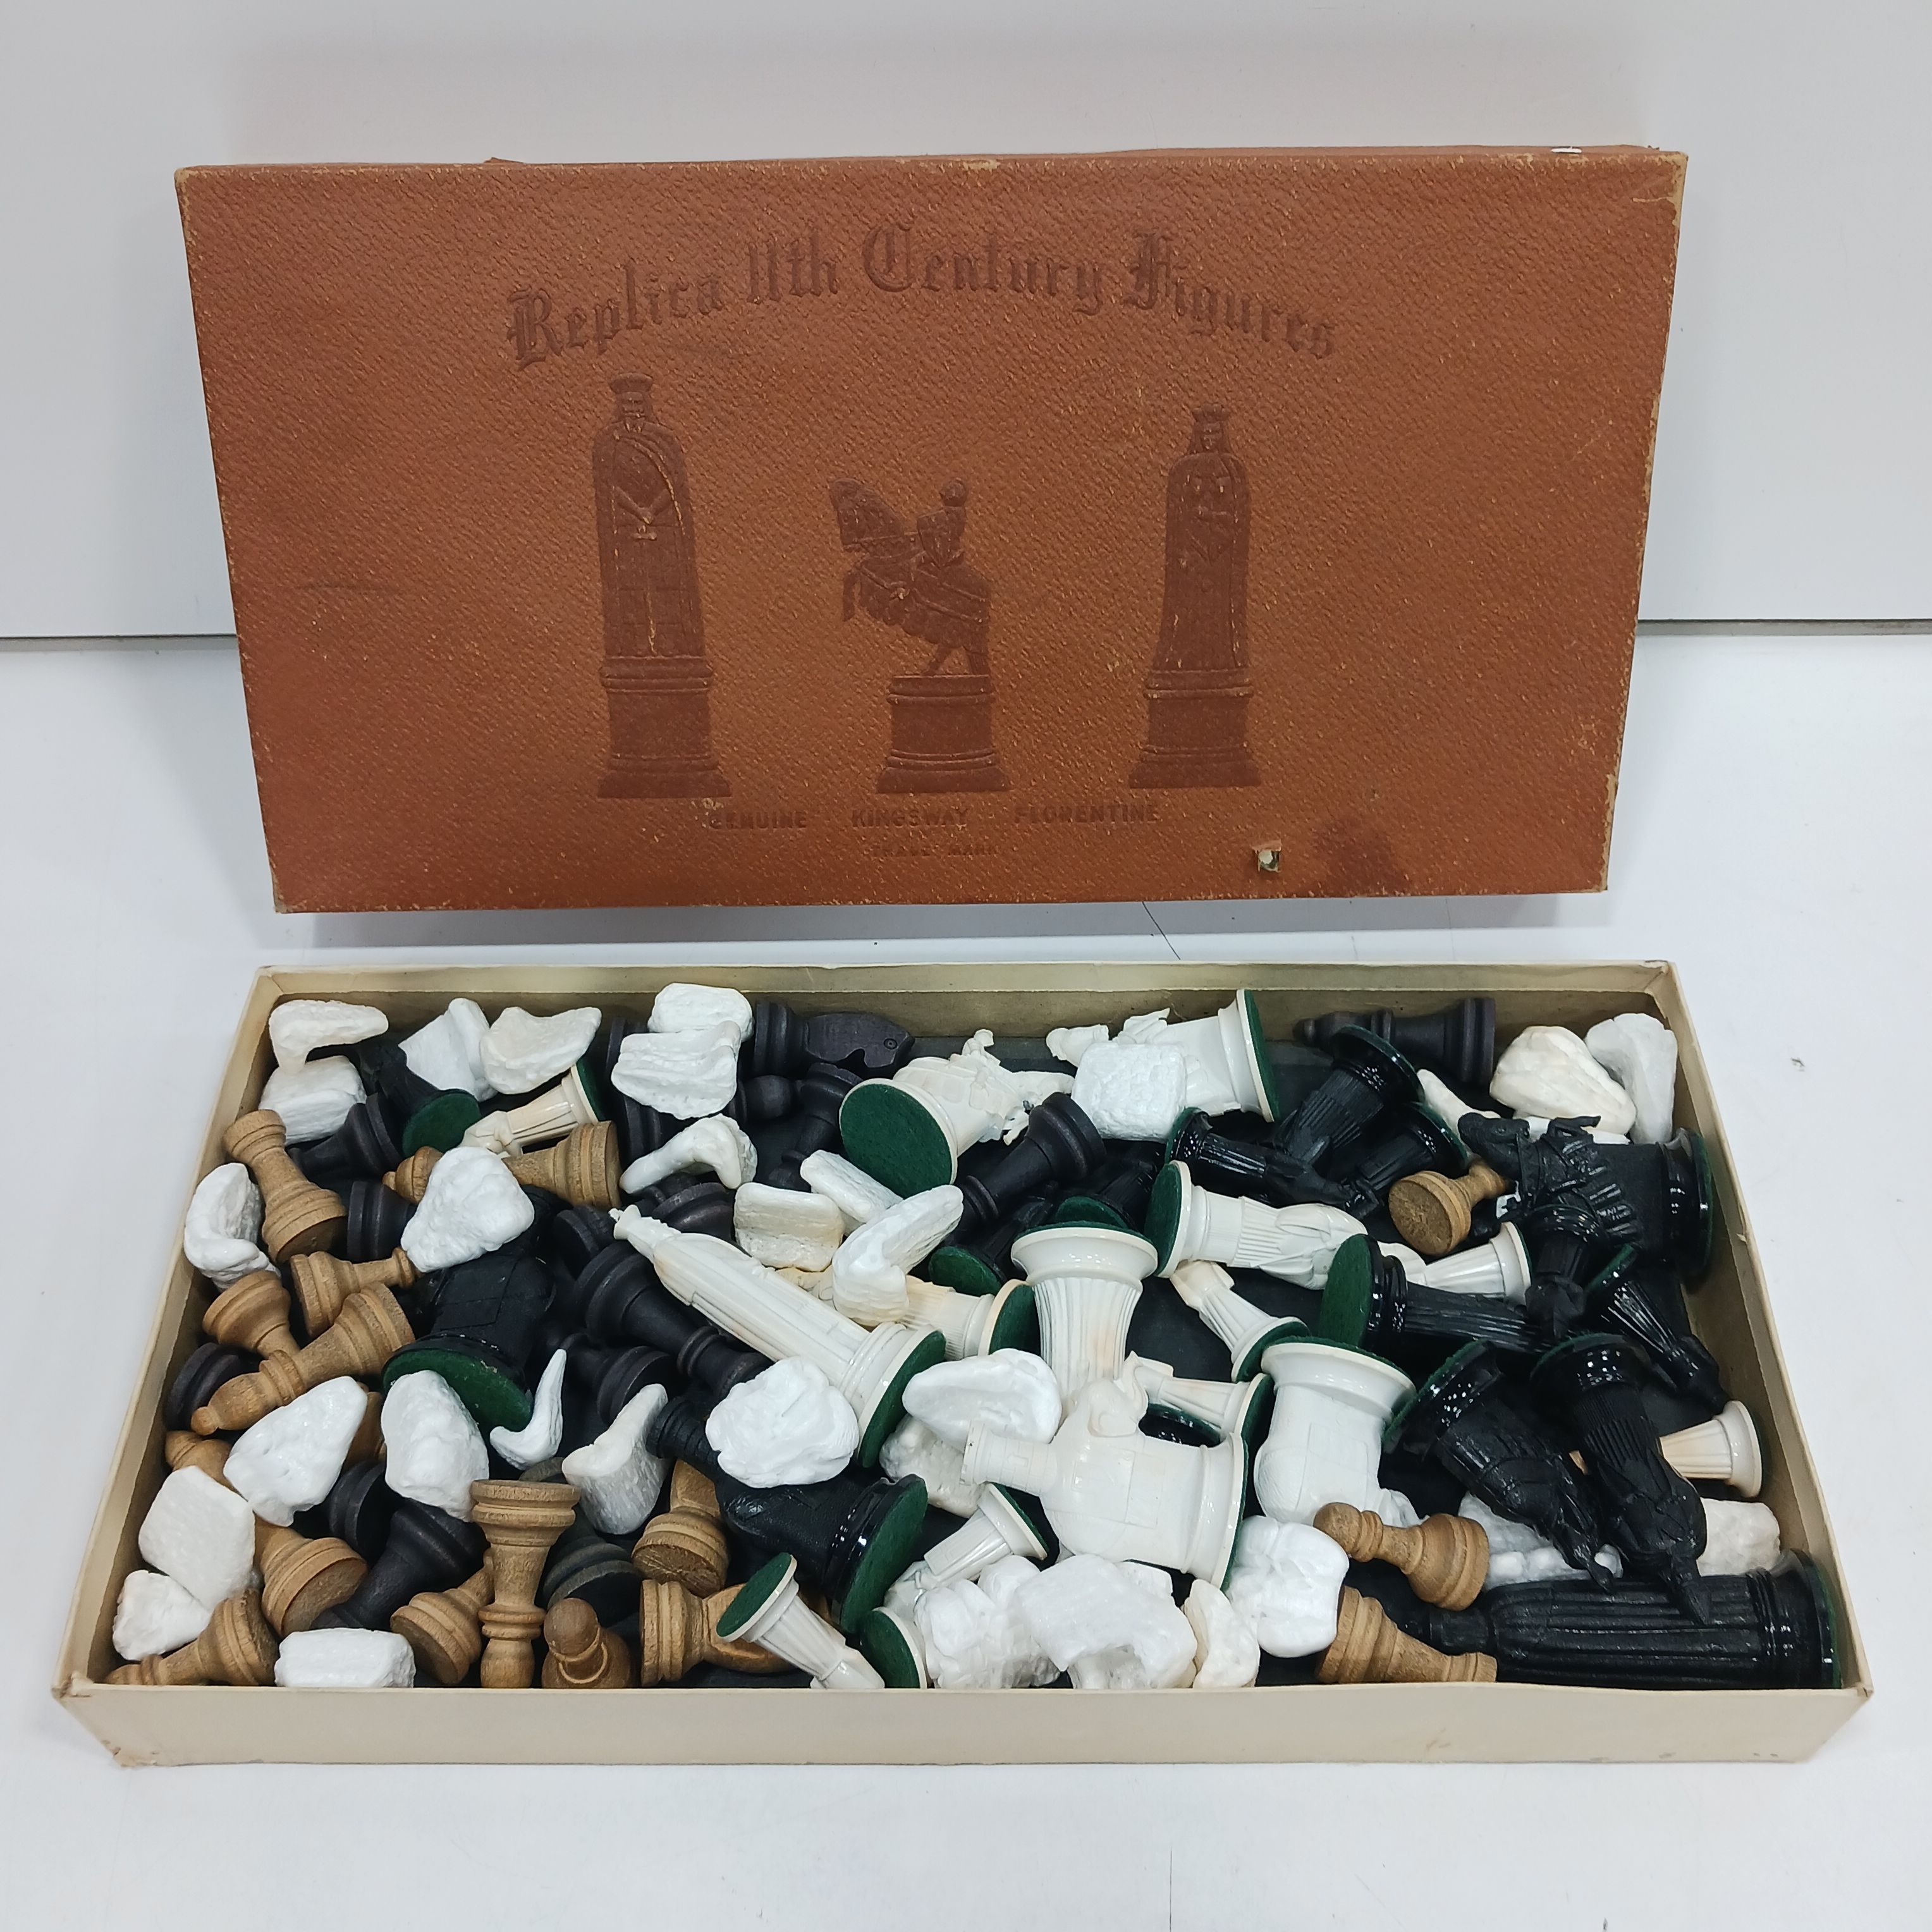 Vintage Newbridge Chess Set Made In Canada Weighted Felted Plastic w Box  3.75”